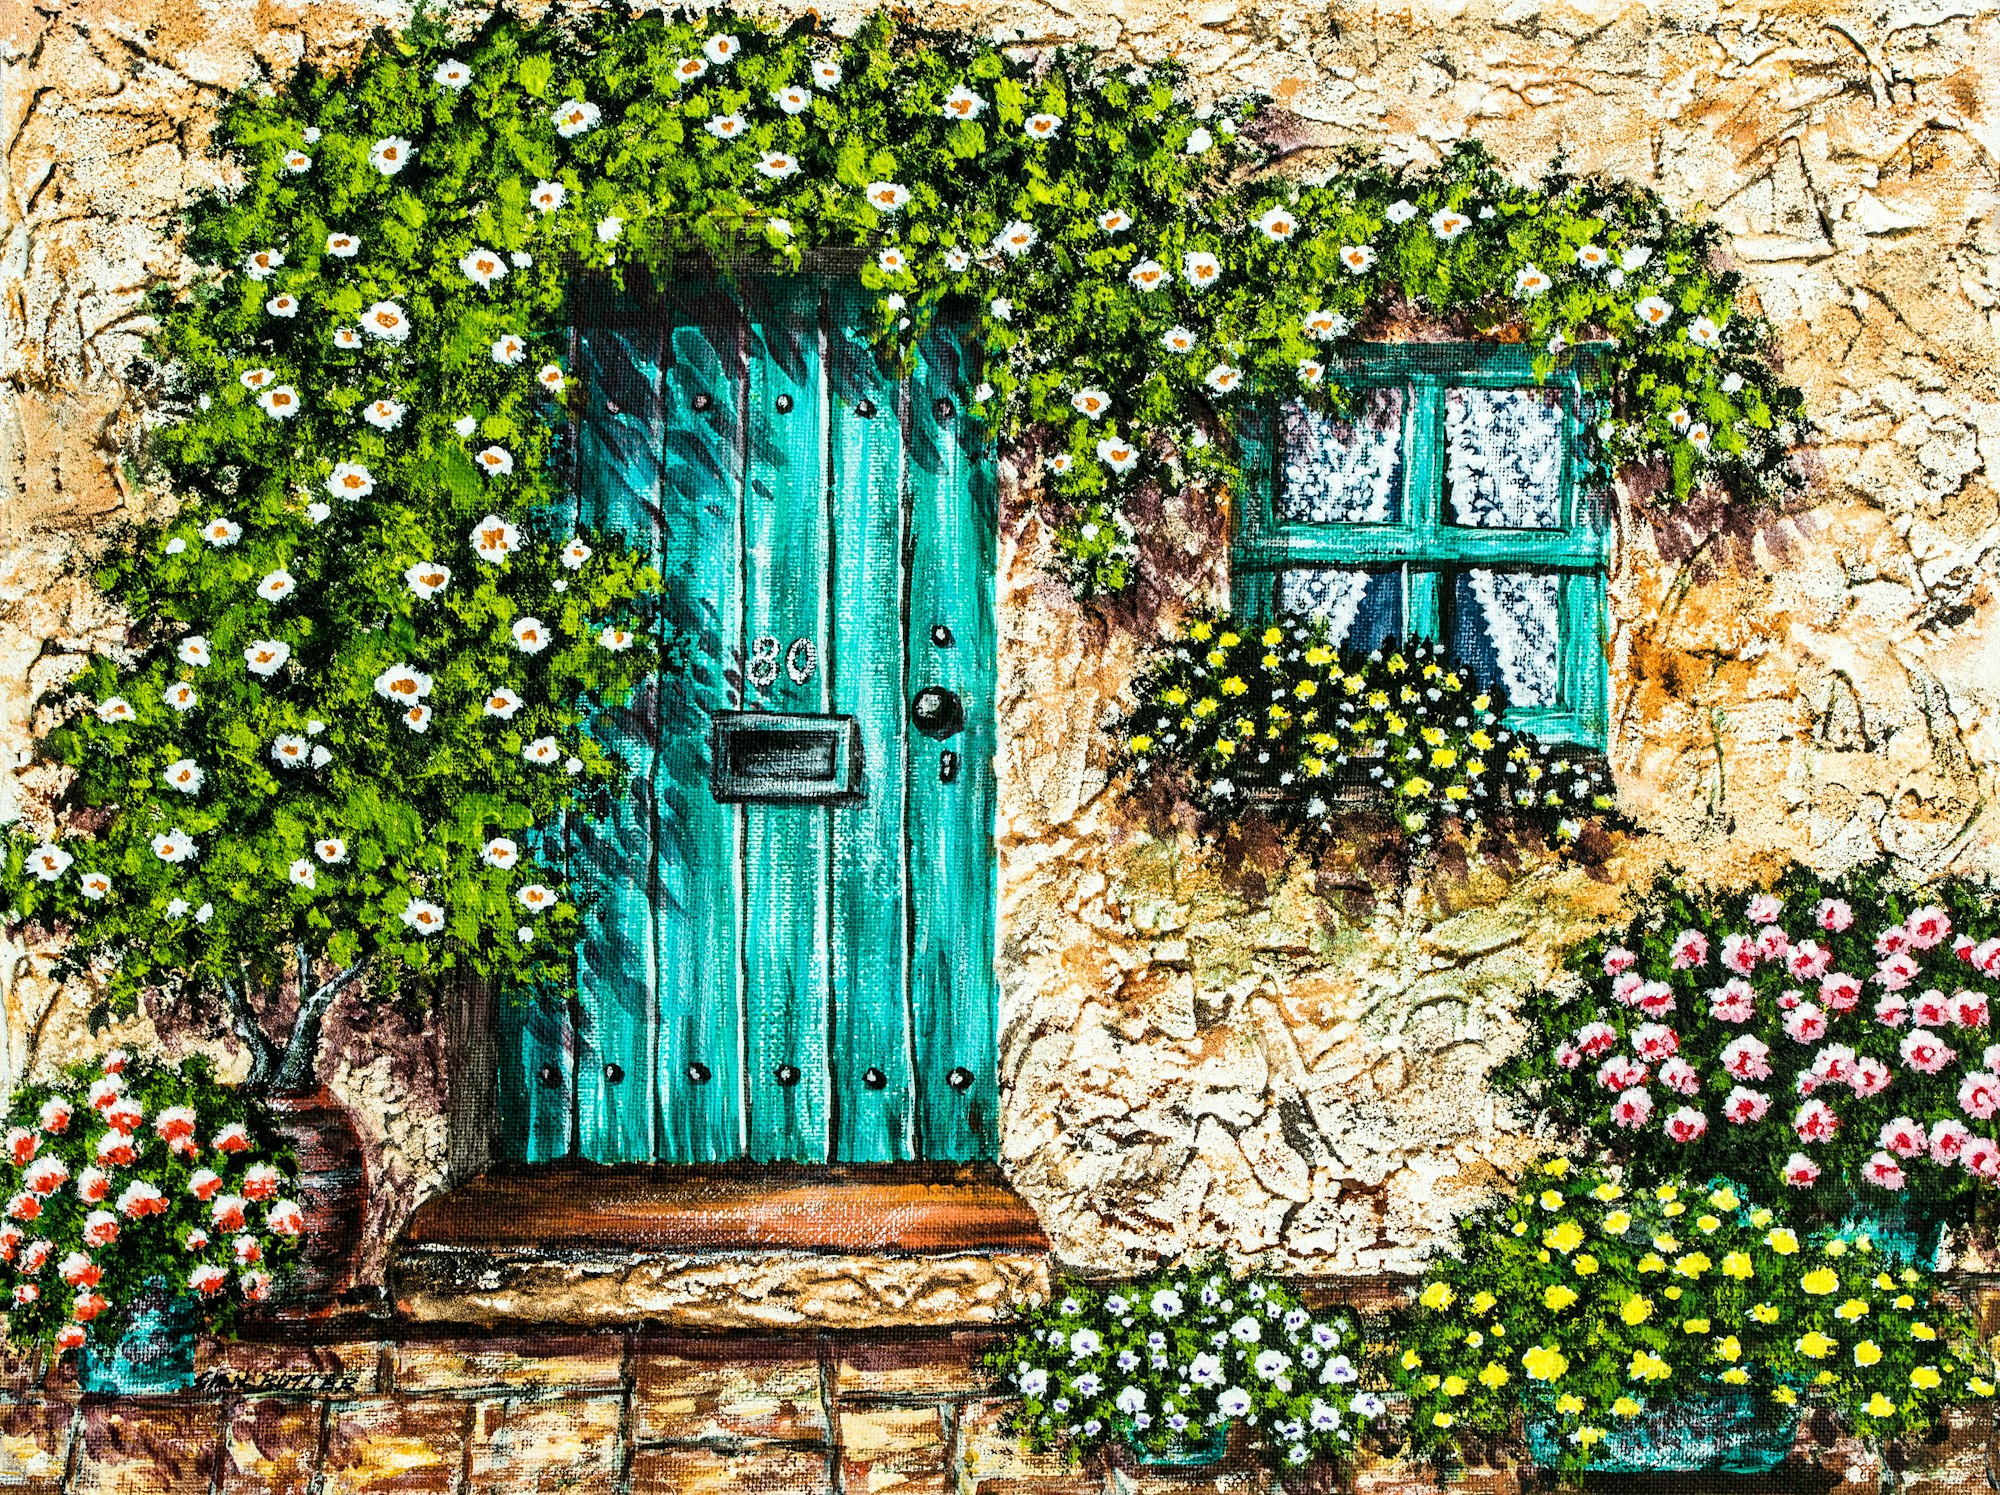 One of Sian Butler’s delightful cottage or doorway paintings. Sian is my Mum and she likes to share her beautiful paintings, and hopes you enjoy them. I like how bright and cheerful these cottage scenes are, and how she expertly renders so many different textures.They are inspired by cottages she has seen, mostly in Britain and Australia.